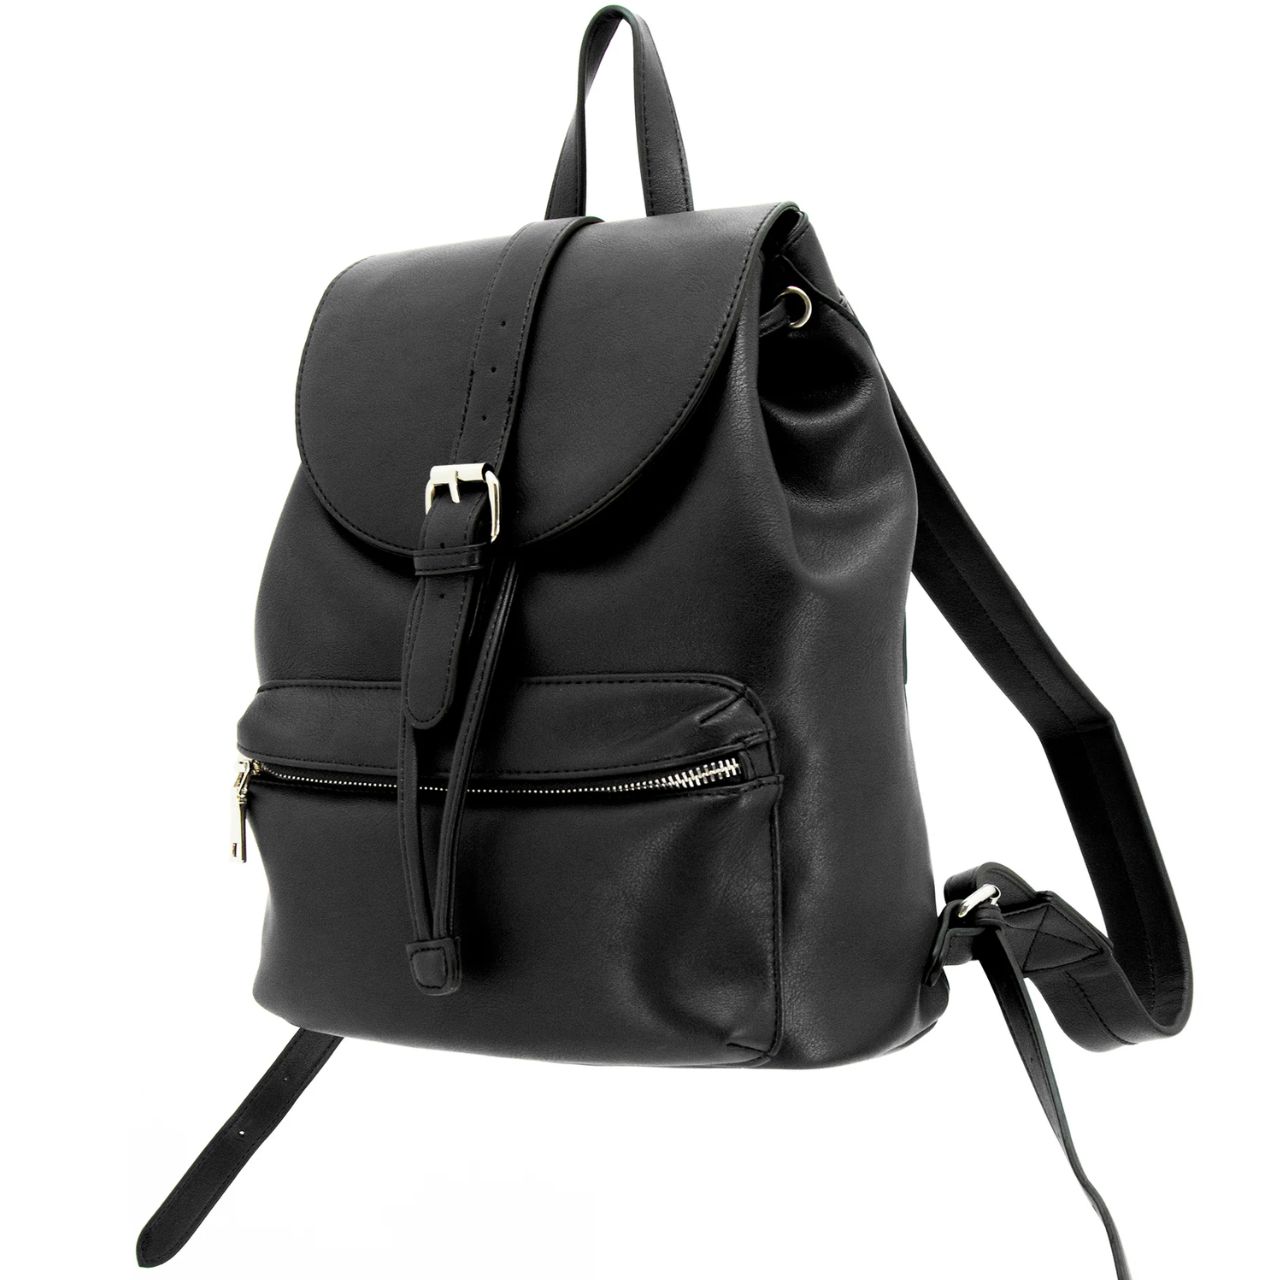 Angled view of Black colored "Amelia" concealed carry backpack